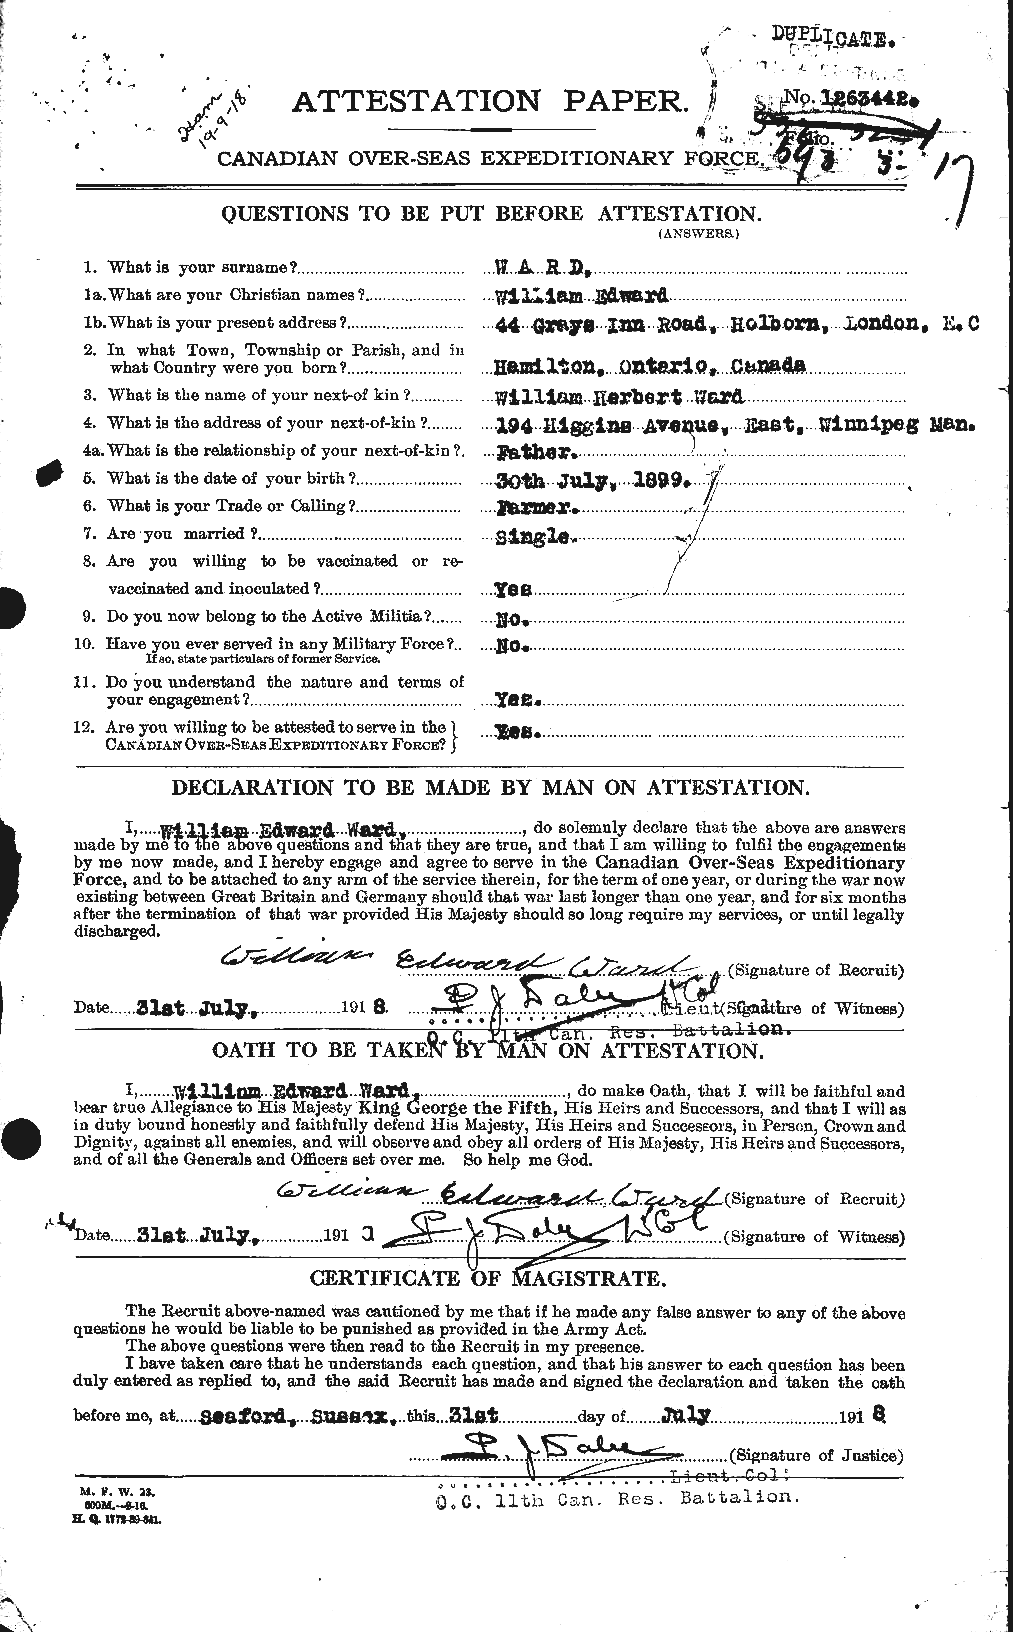 Personnel Records of the First World War - CEF 659810a